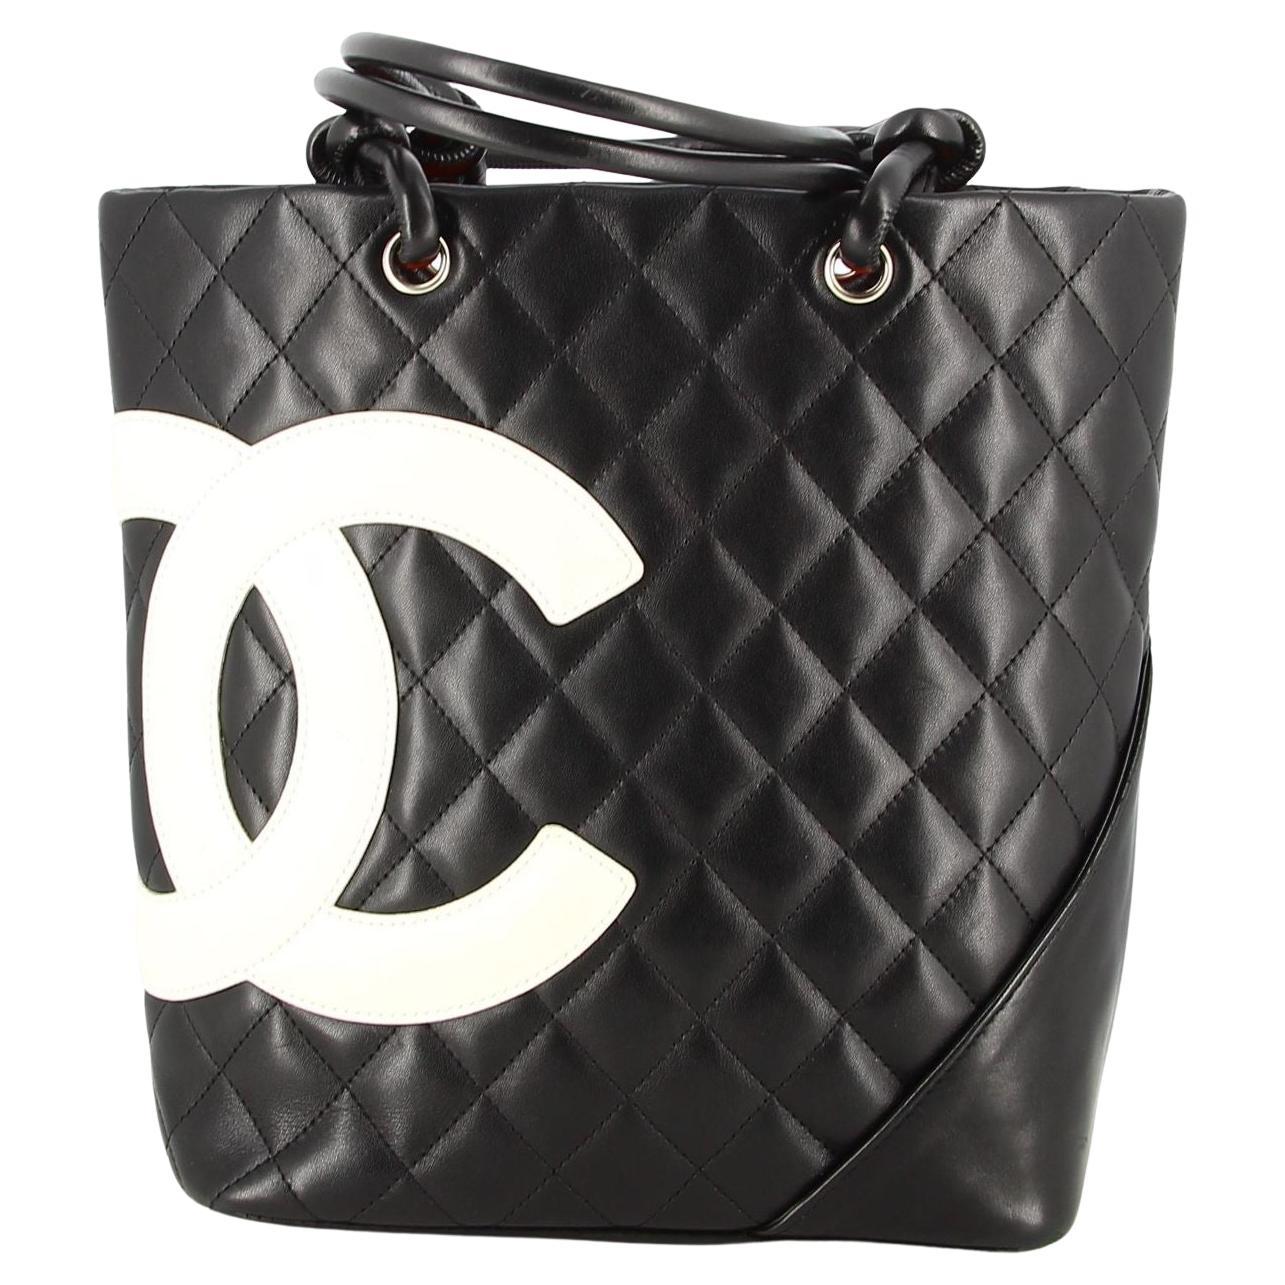 2004-2005 Chanel Cambon Black Leather Bag